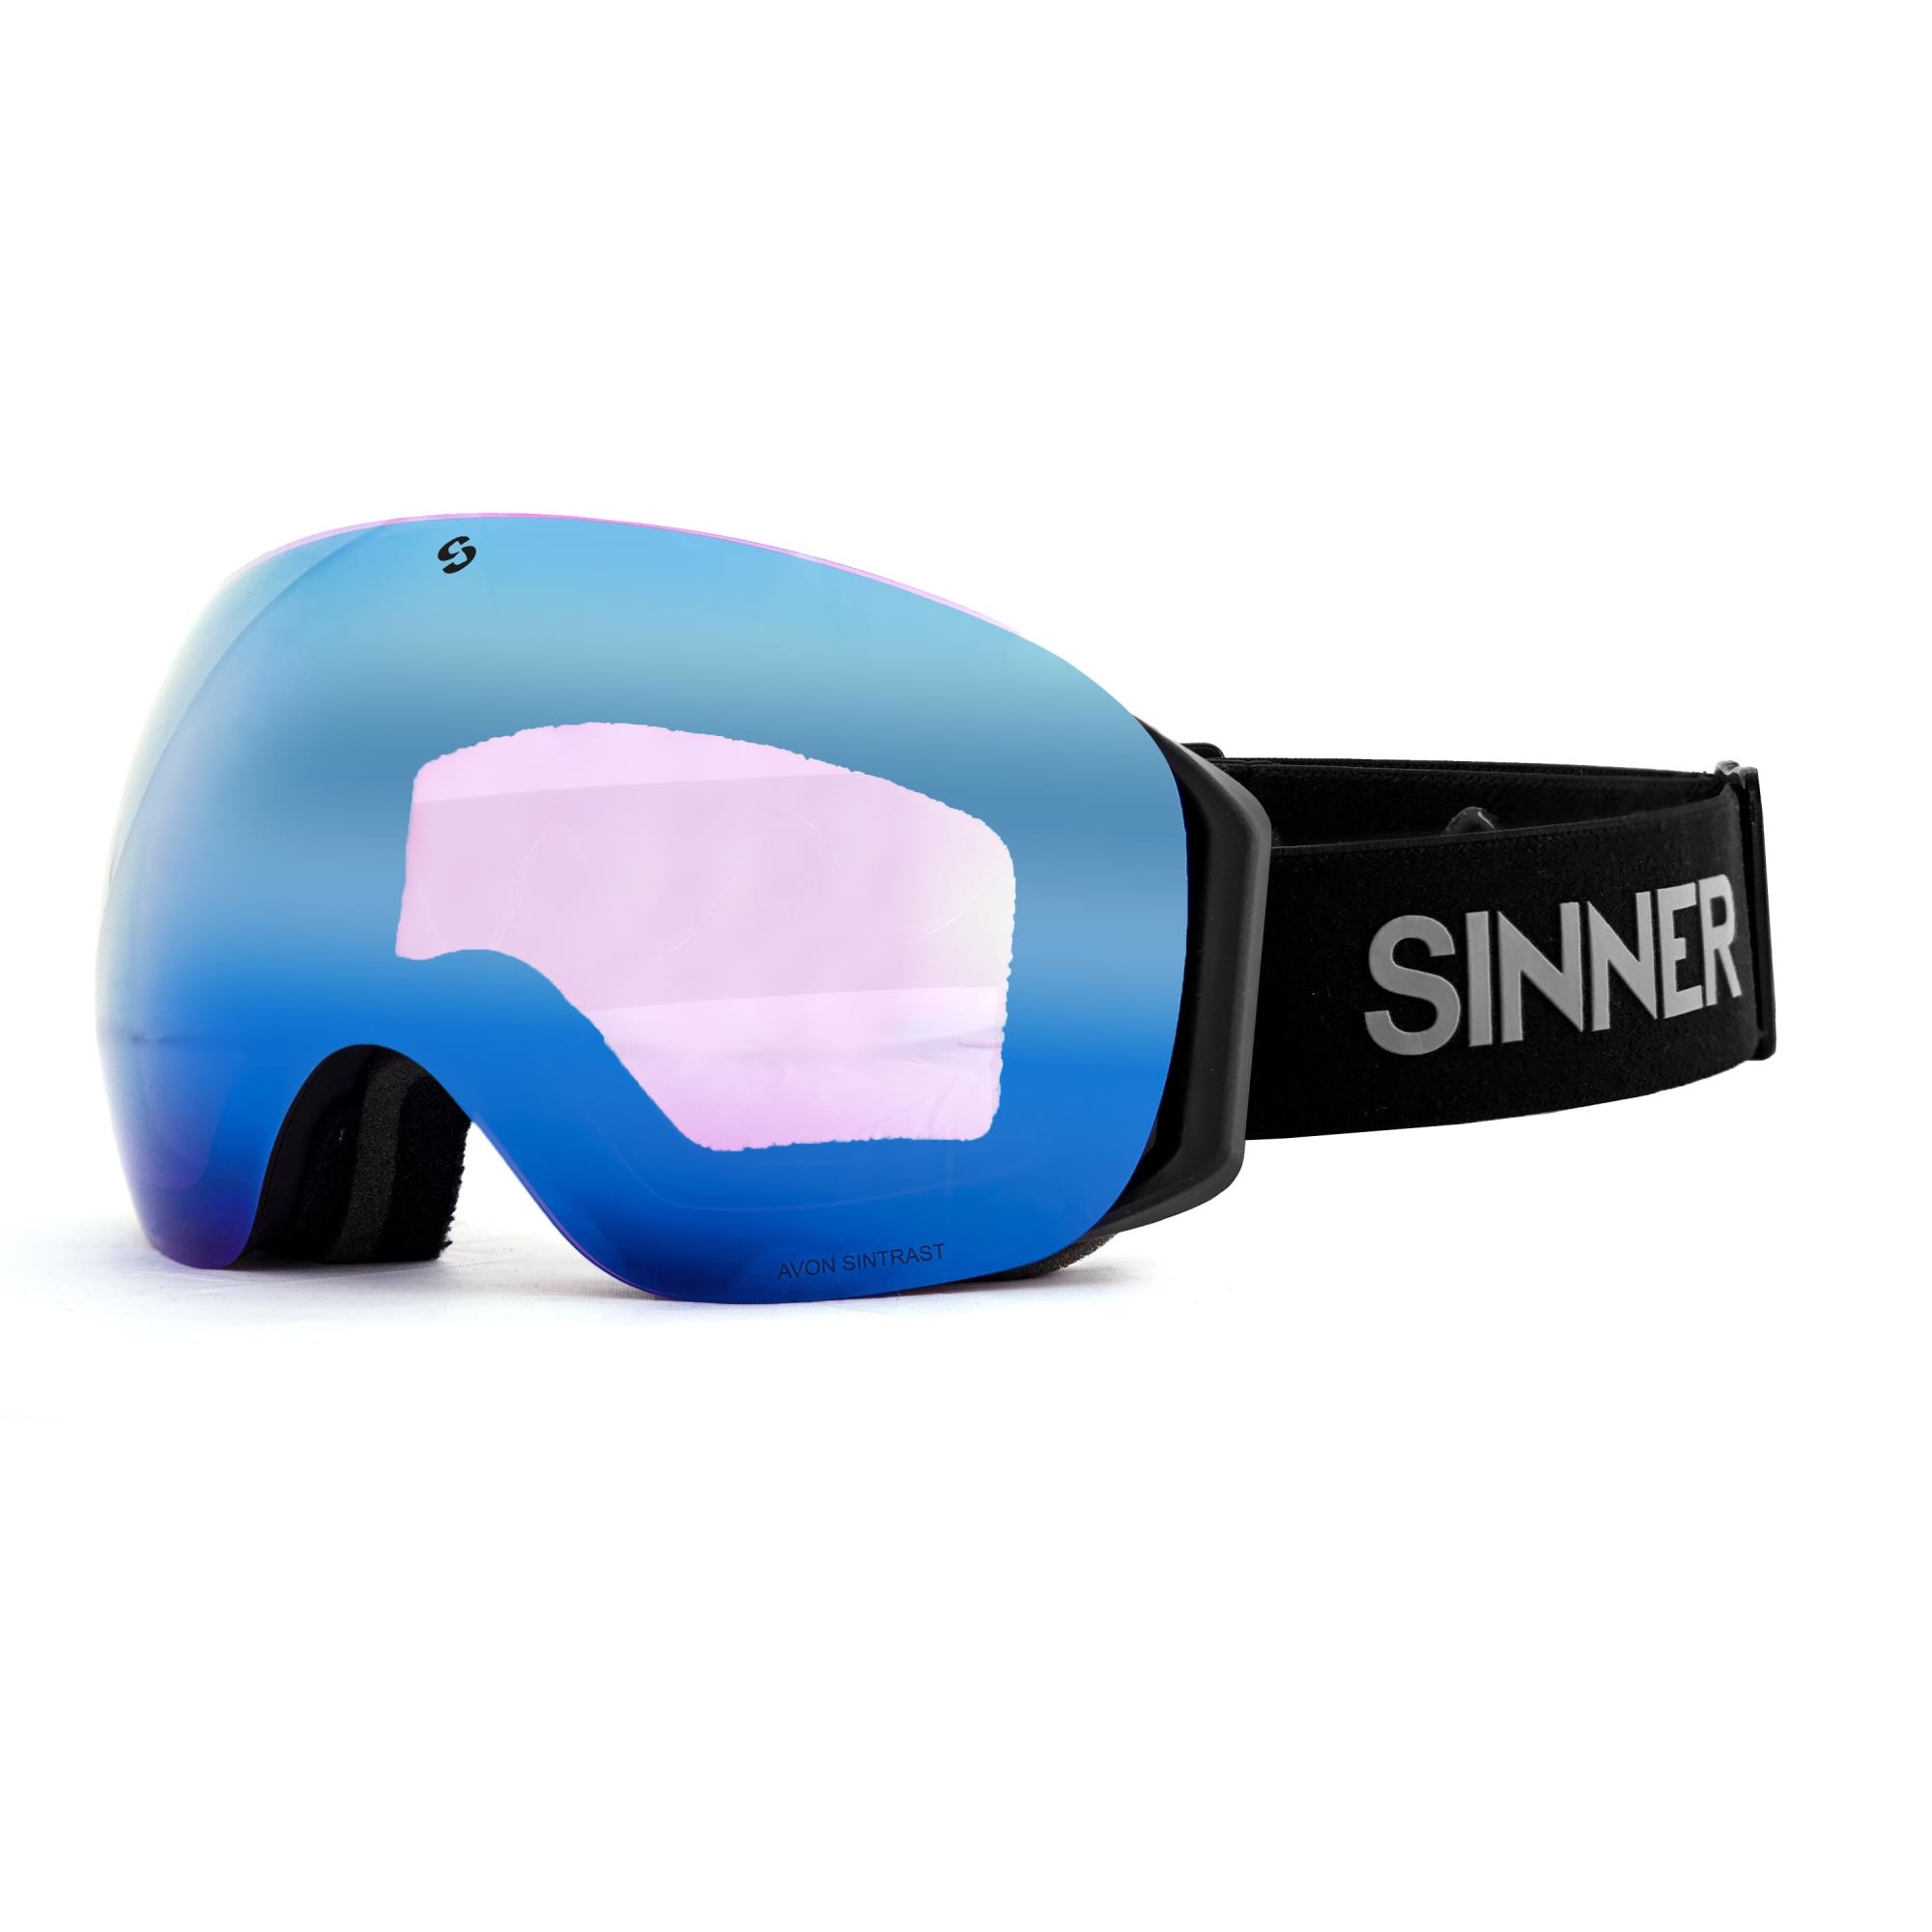 Sinner 2023/2024 Snowboard Goggles Preview